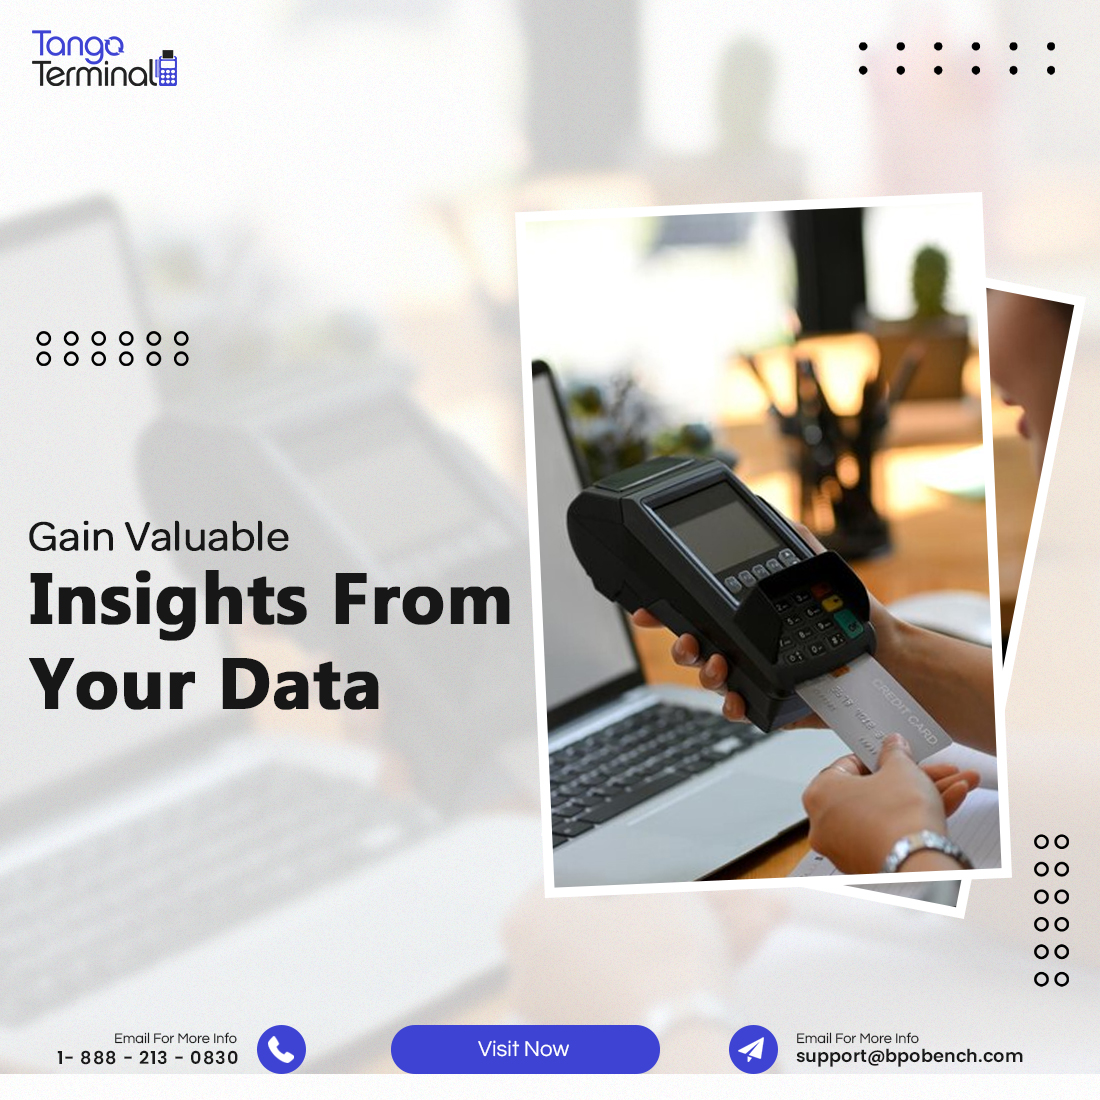 Our POS reports give data in real-time and are formatted with easy-to-read information.

#tangoterminal #pos #retailbusiness #automatingtasks #marketingsolution #ecommerce